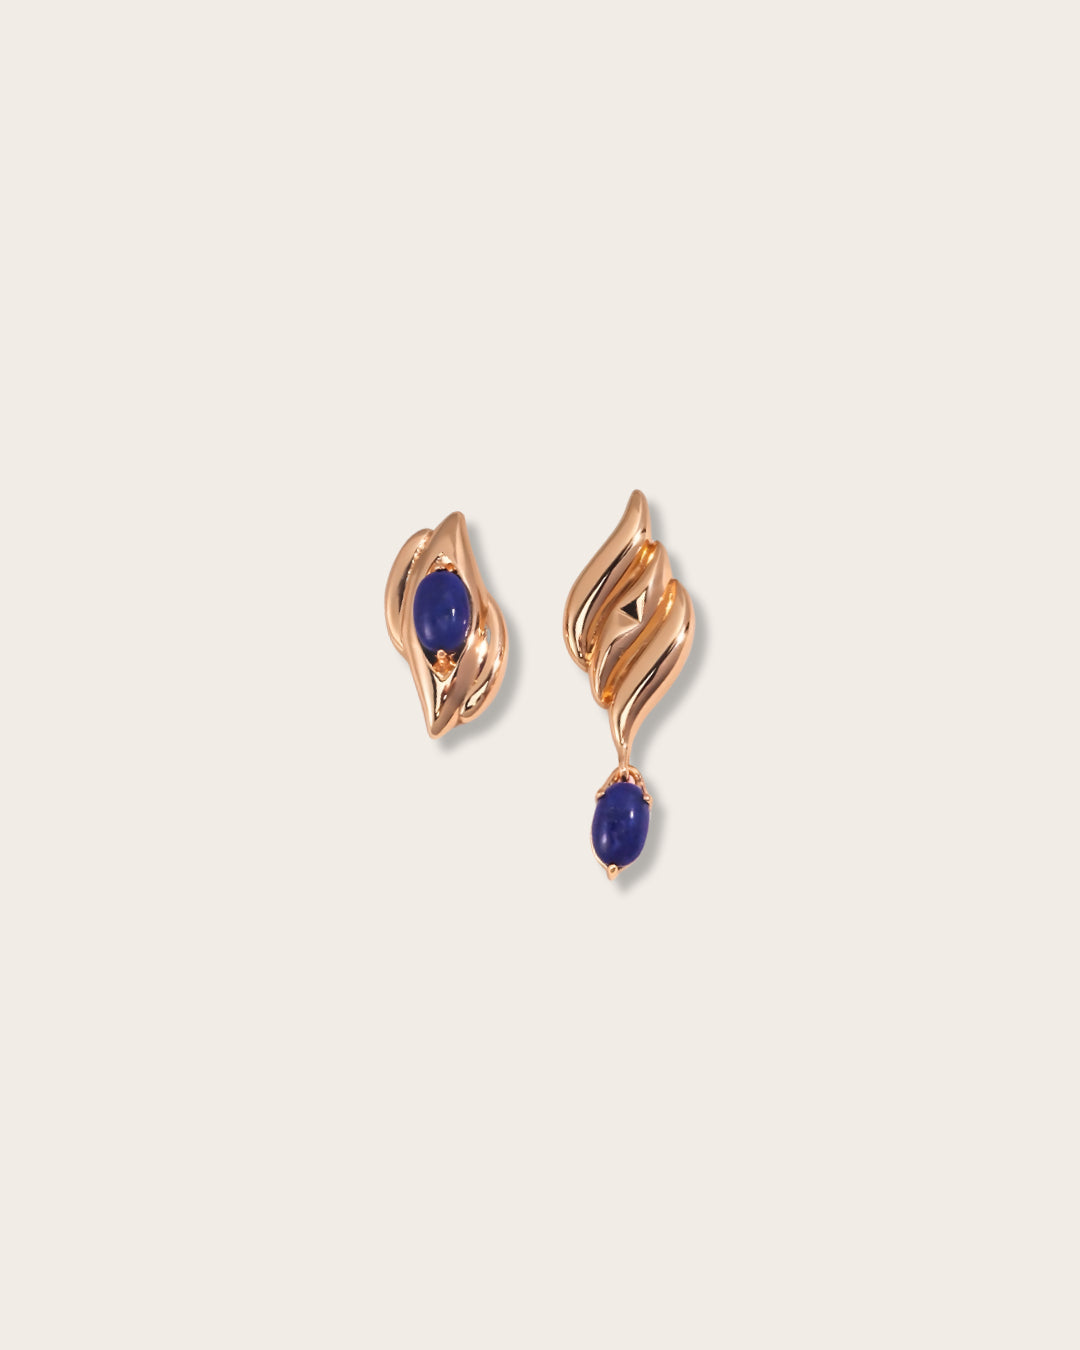 Capturing the essence of artistic beauty - Expressive Earrings - S925 Sterling Silver with 18K Gold Vermeil- Embed with natural blue gemstone - Crafted to add a touch of enchantment and allure to your everyday look